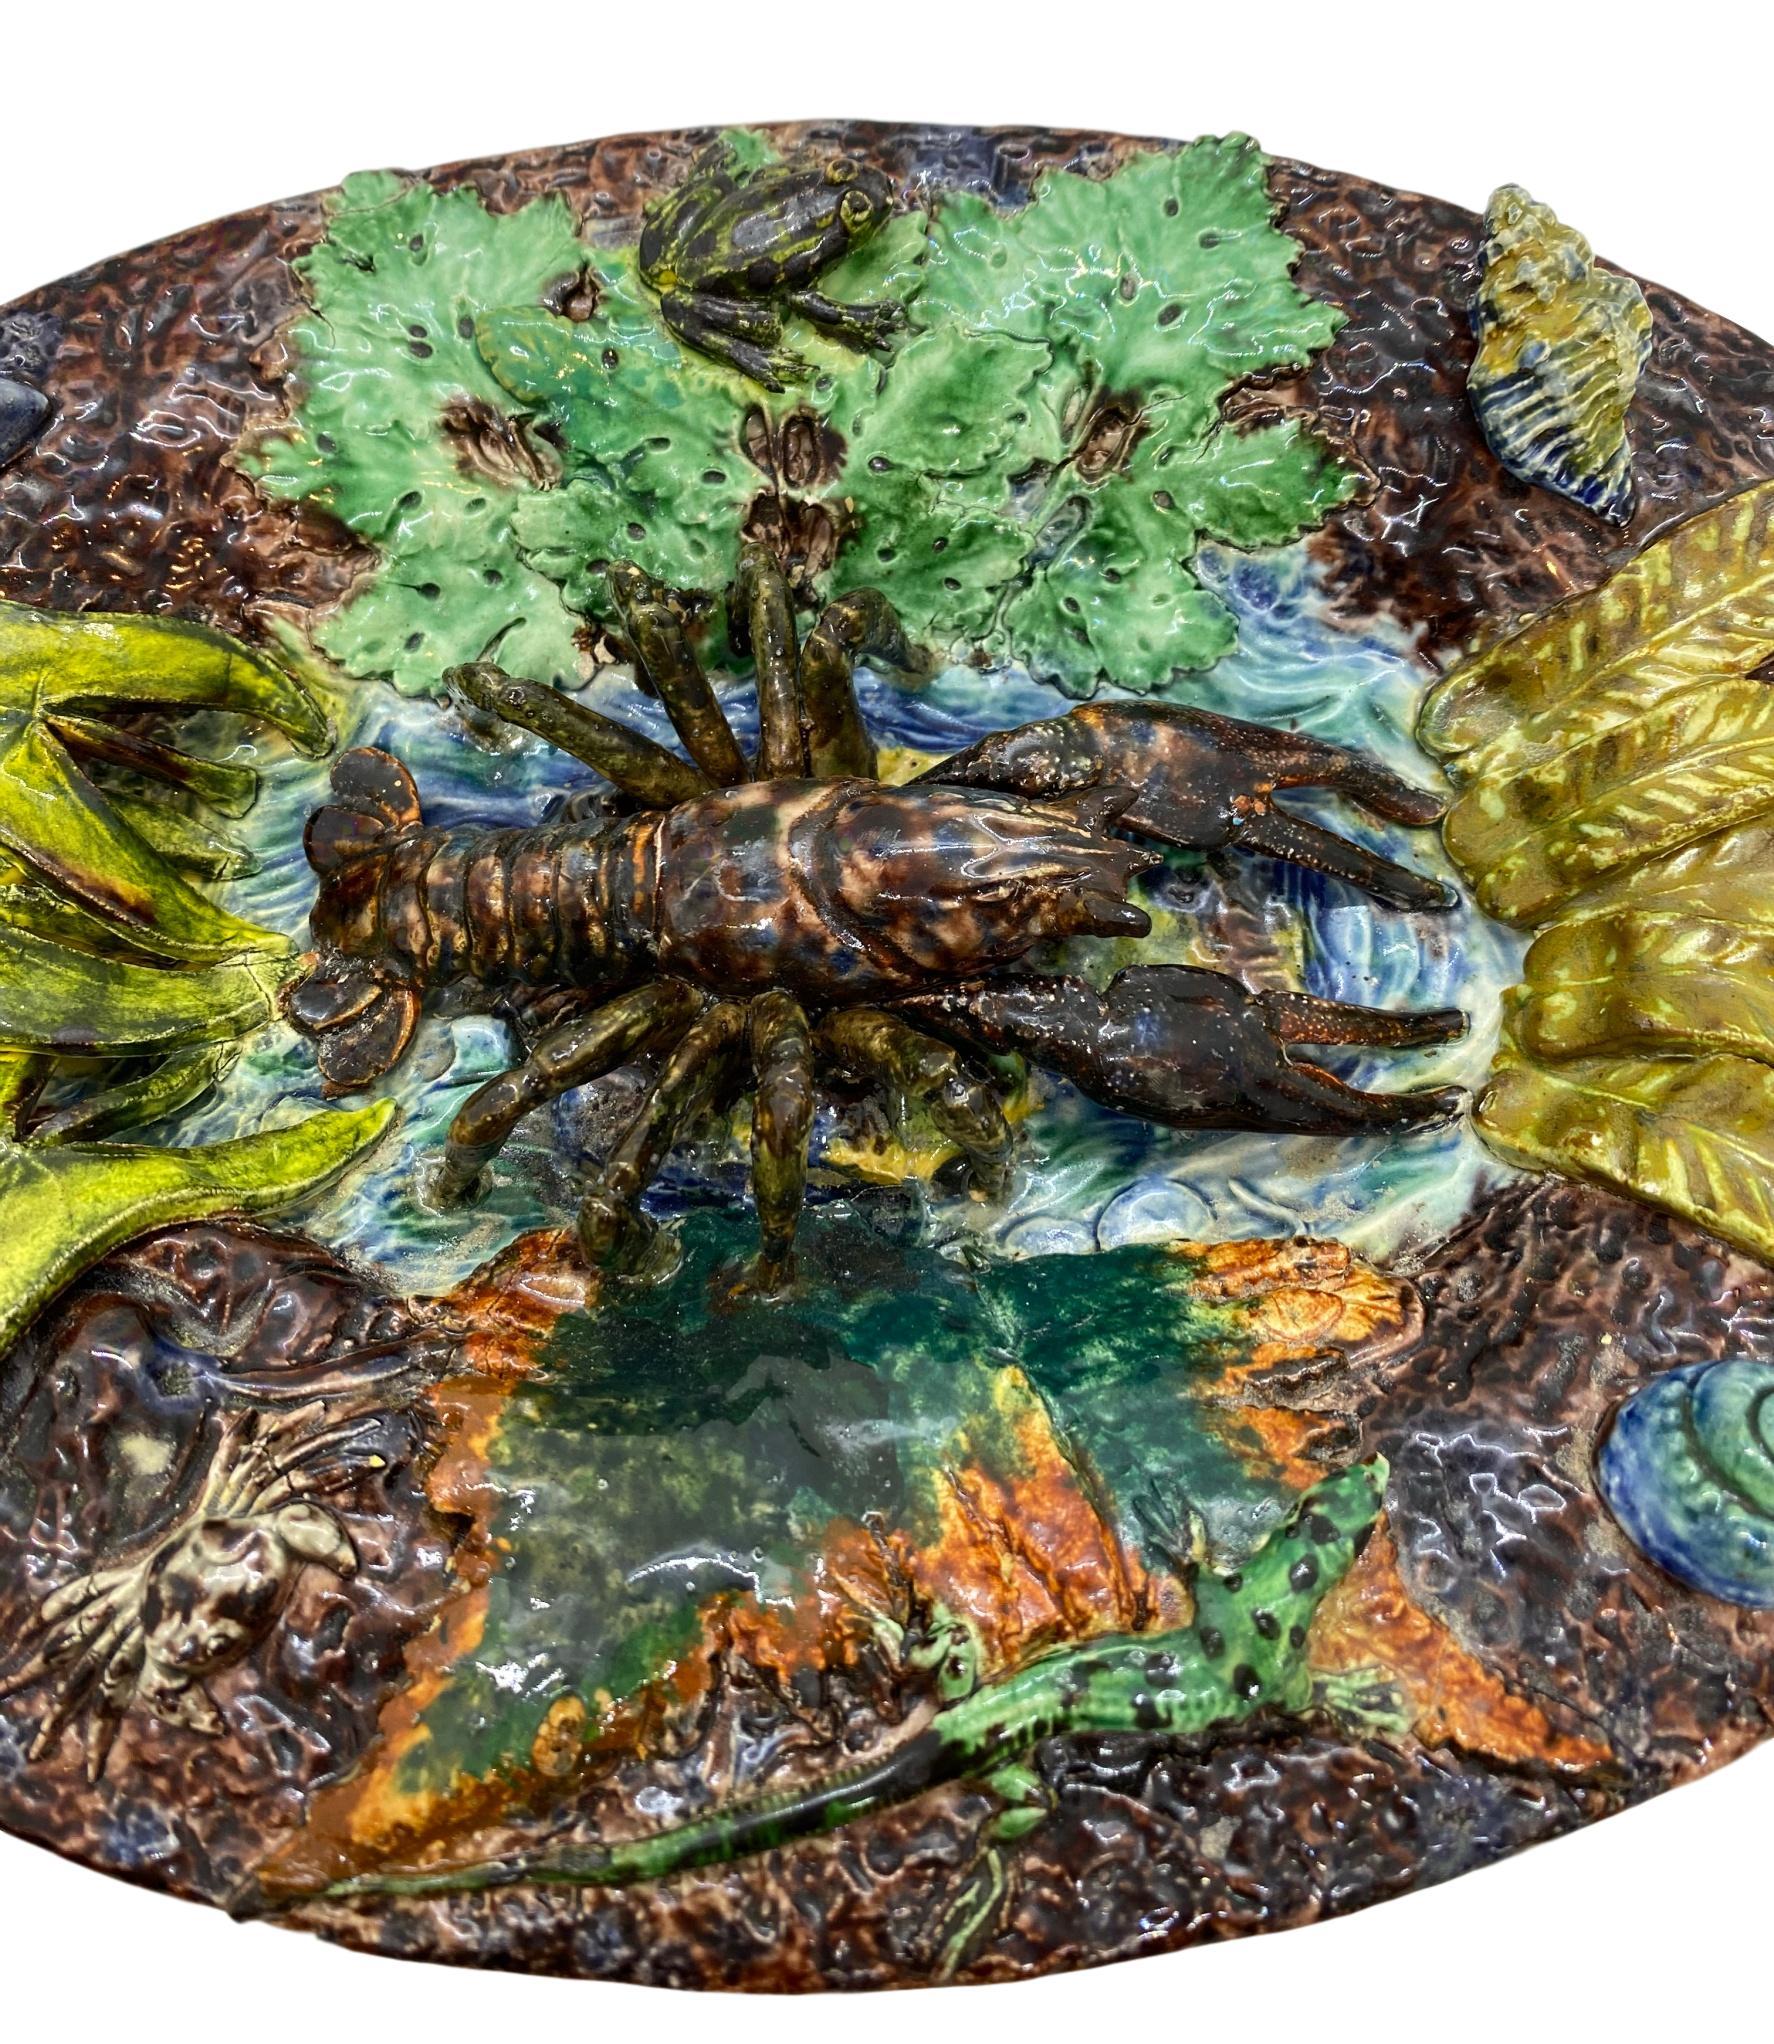 Thomas Sergent Palissy Ware Majolica Trompe L'oeil lobster plaque, Paris, circa 1875.
Thomas-Victor Sergent, (French, 1830-1890.) Sergent was an important member of the School of Paris; he established his studio and shop, located at 106 avenue